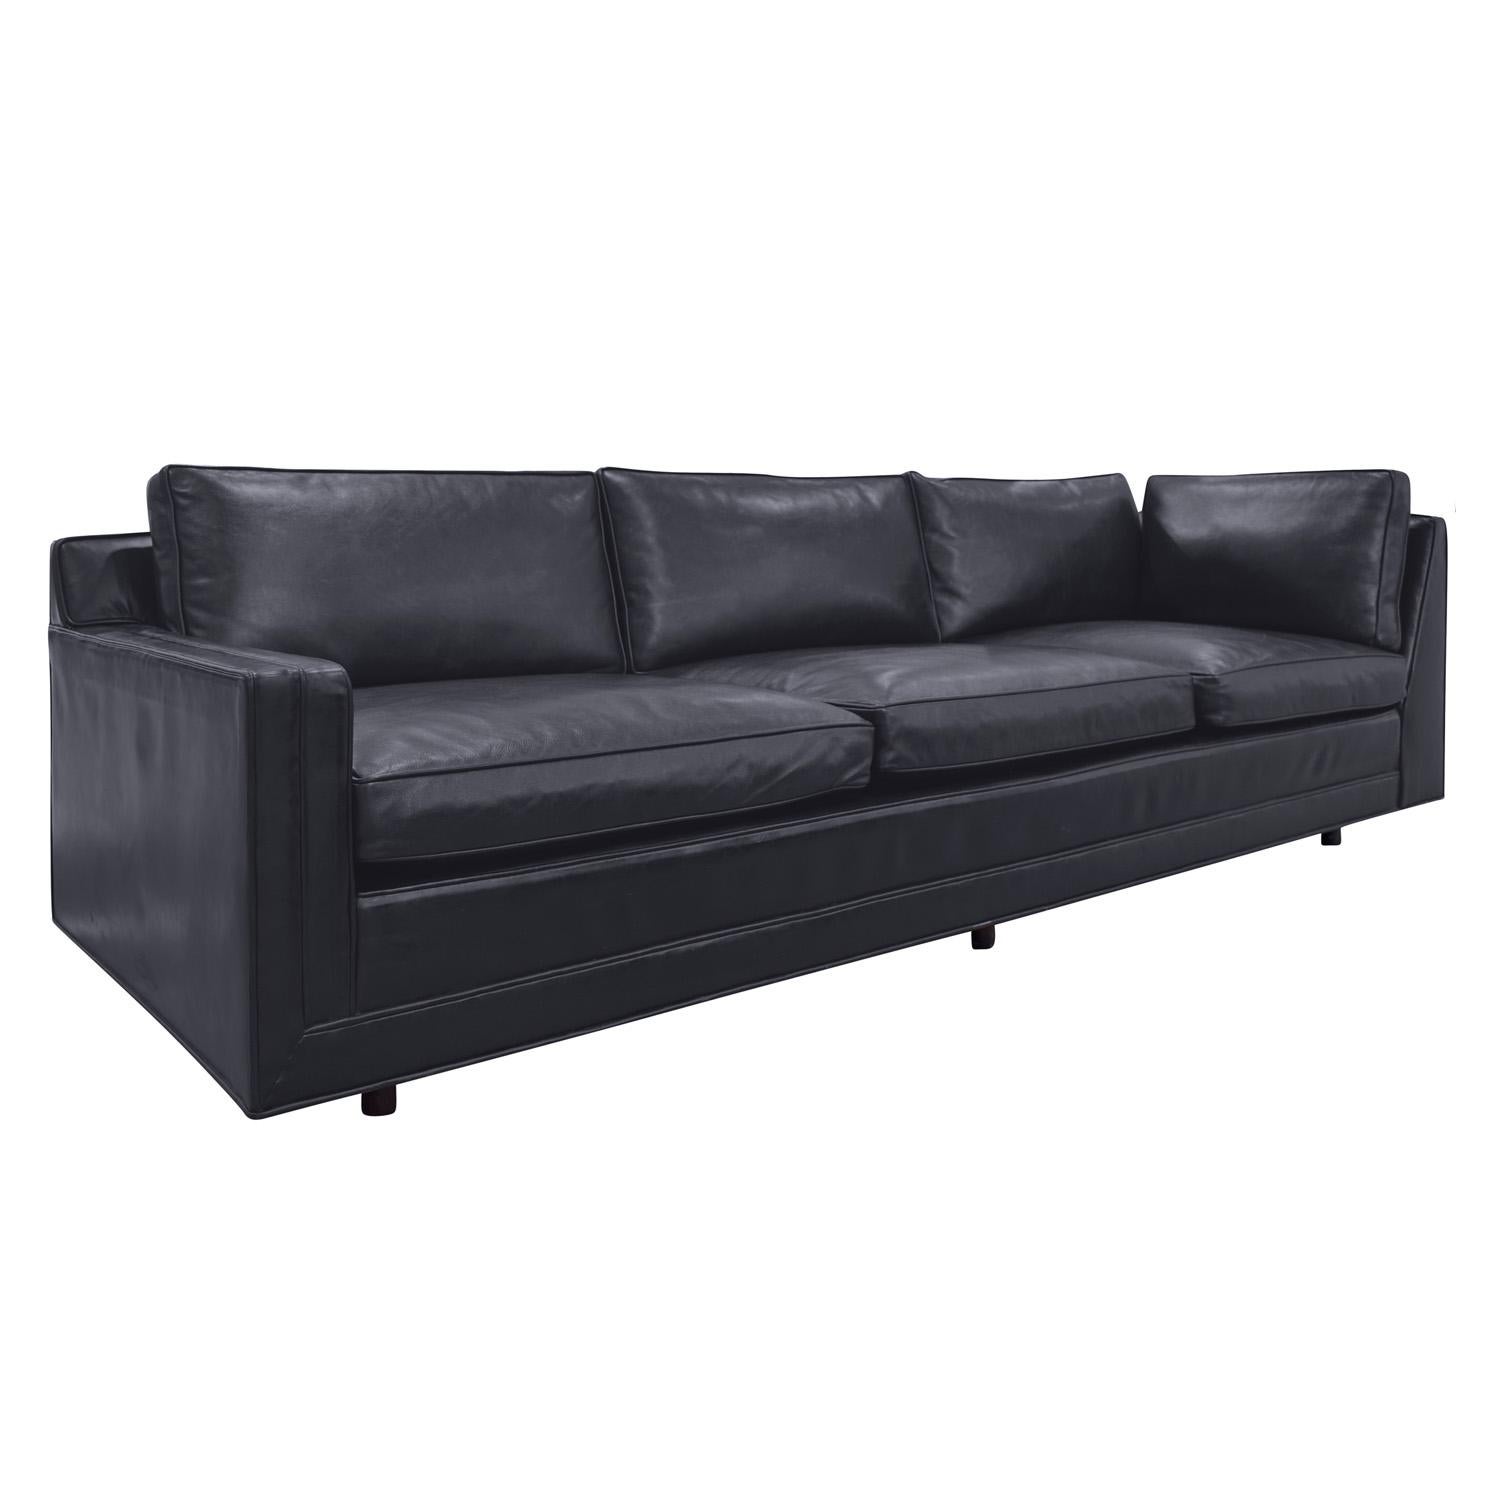 Mid-Century Modern Harvey Probber Sectional Sofa in Black Leather with Mahogany Legs 1950s 'signed'